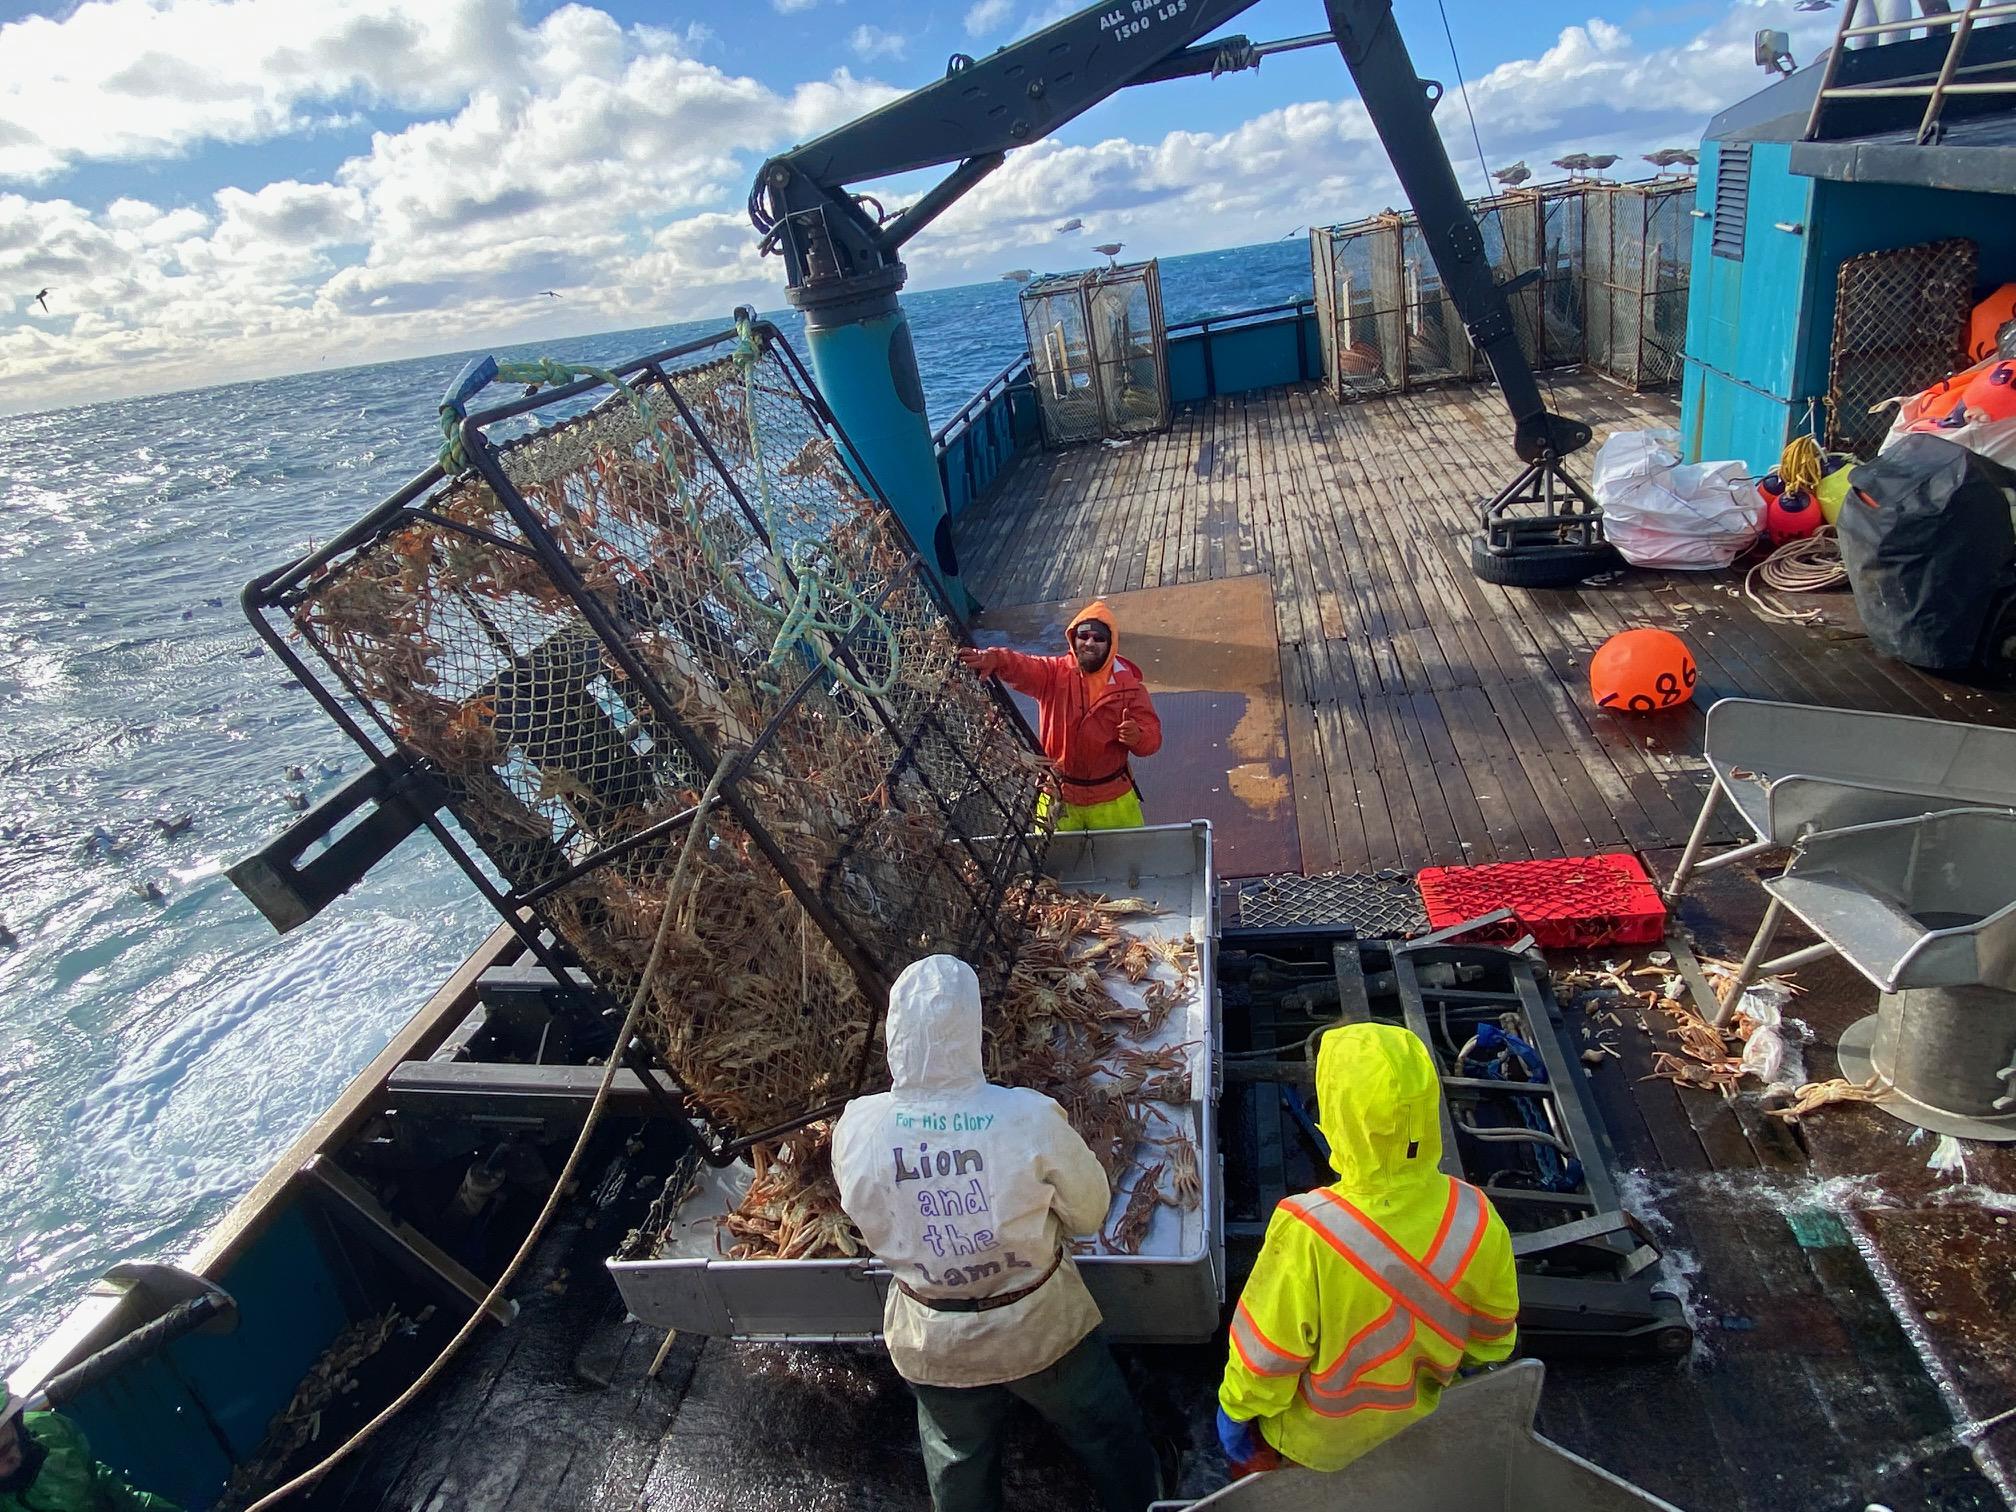 With fishing slowed by pandemic, Bering Sea crabbers push for extended  season